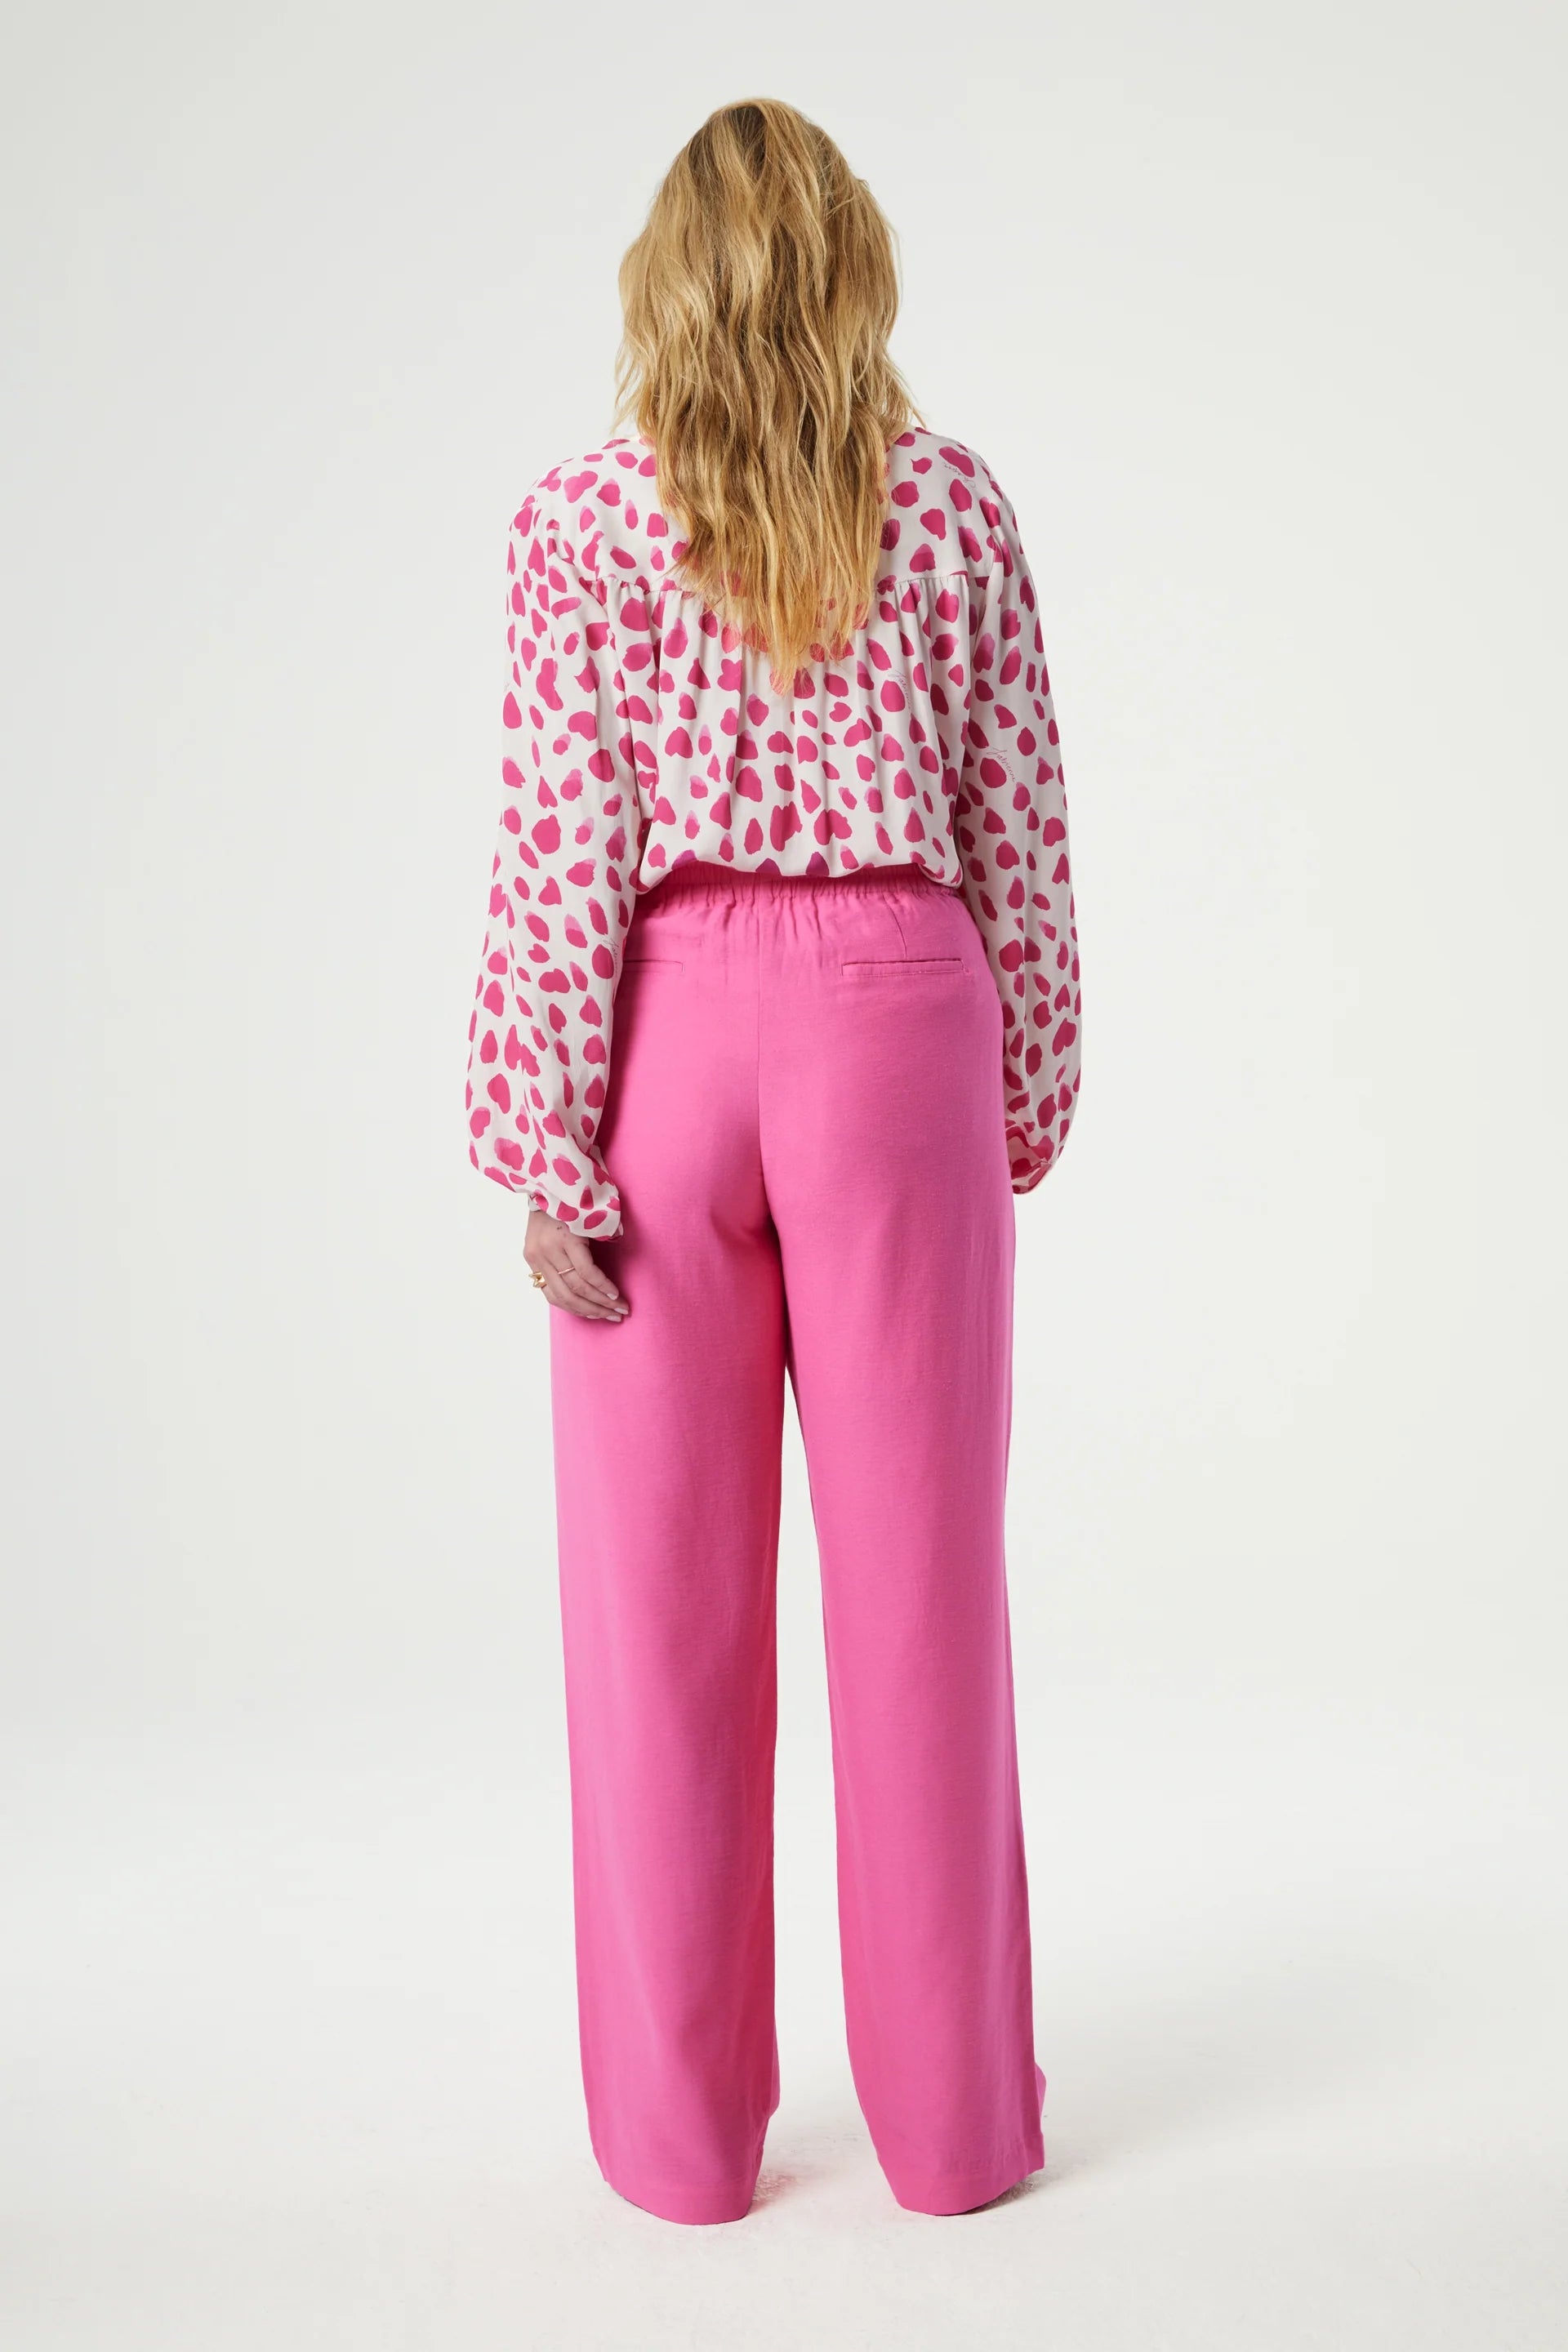 A person standing with their back to the camera, wearing a white shirt with red polka dots and Fabienne Chapot Neale Trousers in Candy Pink.